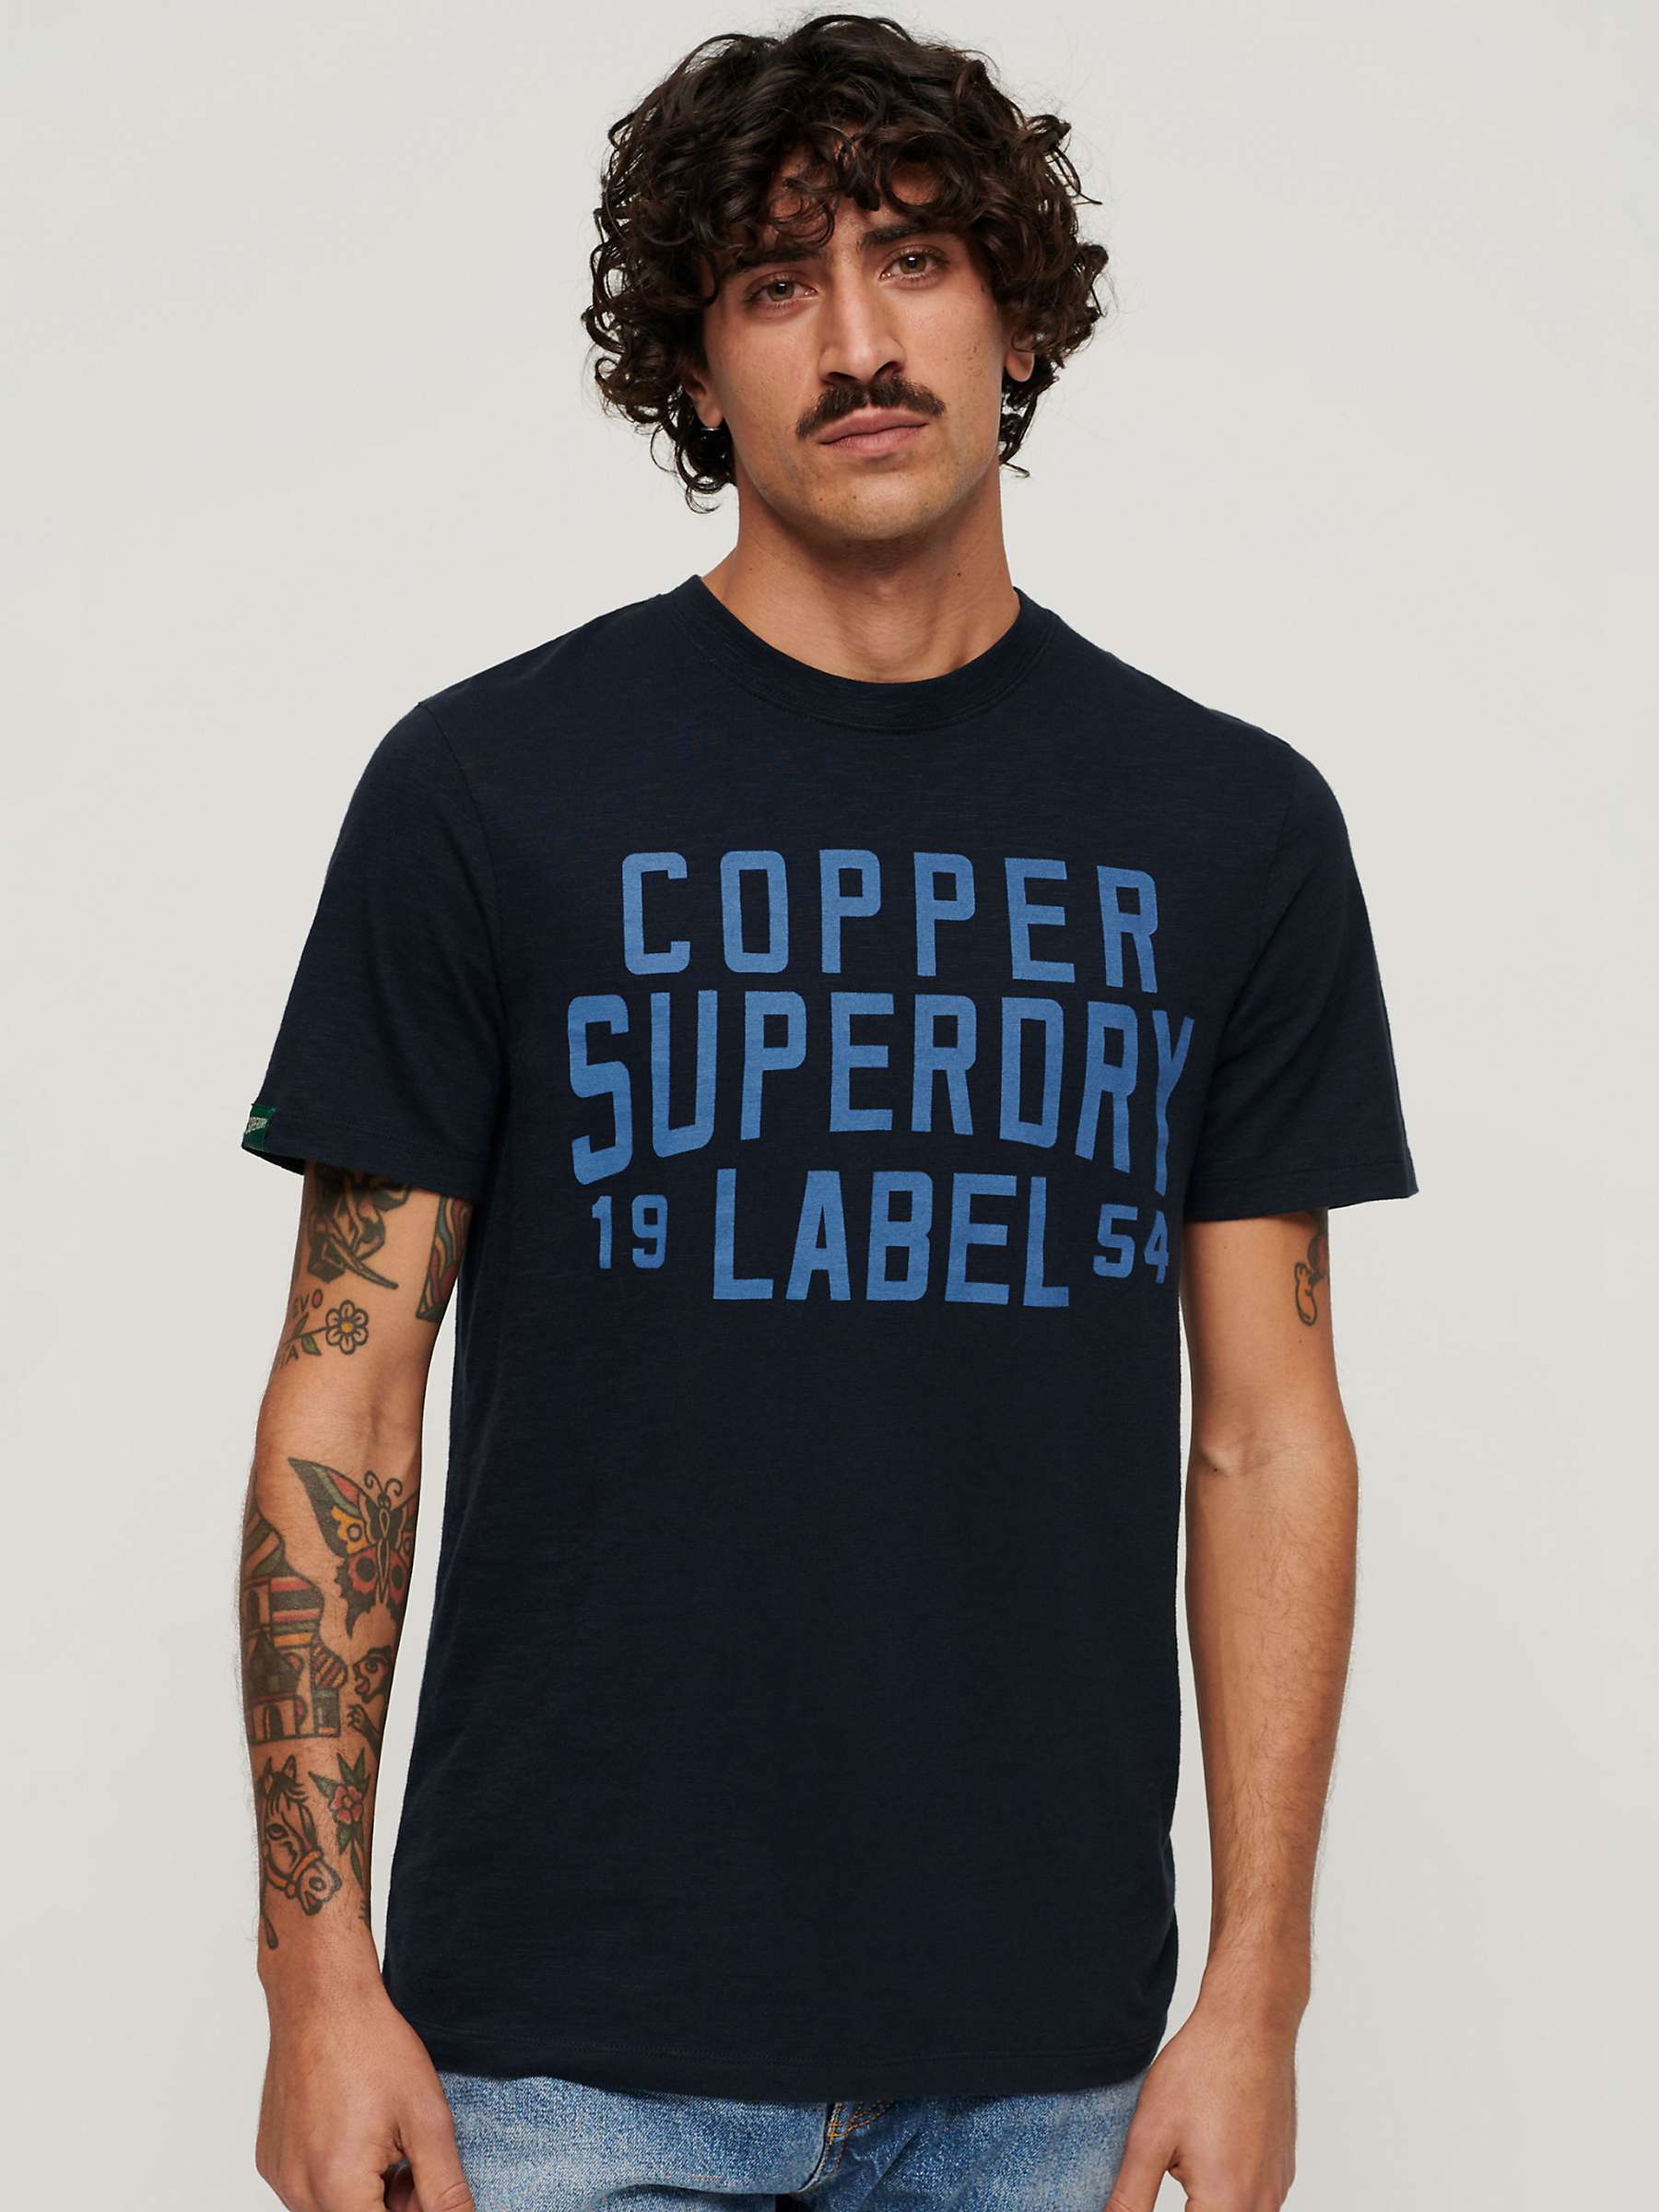 Buy Superdry Copper Label Chest Graphic T-Shirt Online at johnlewis.com